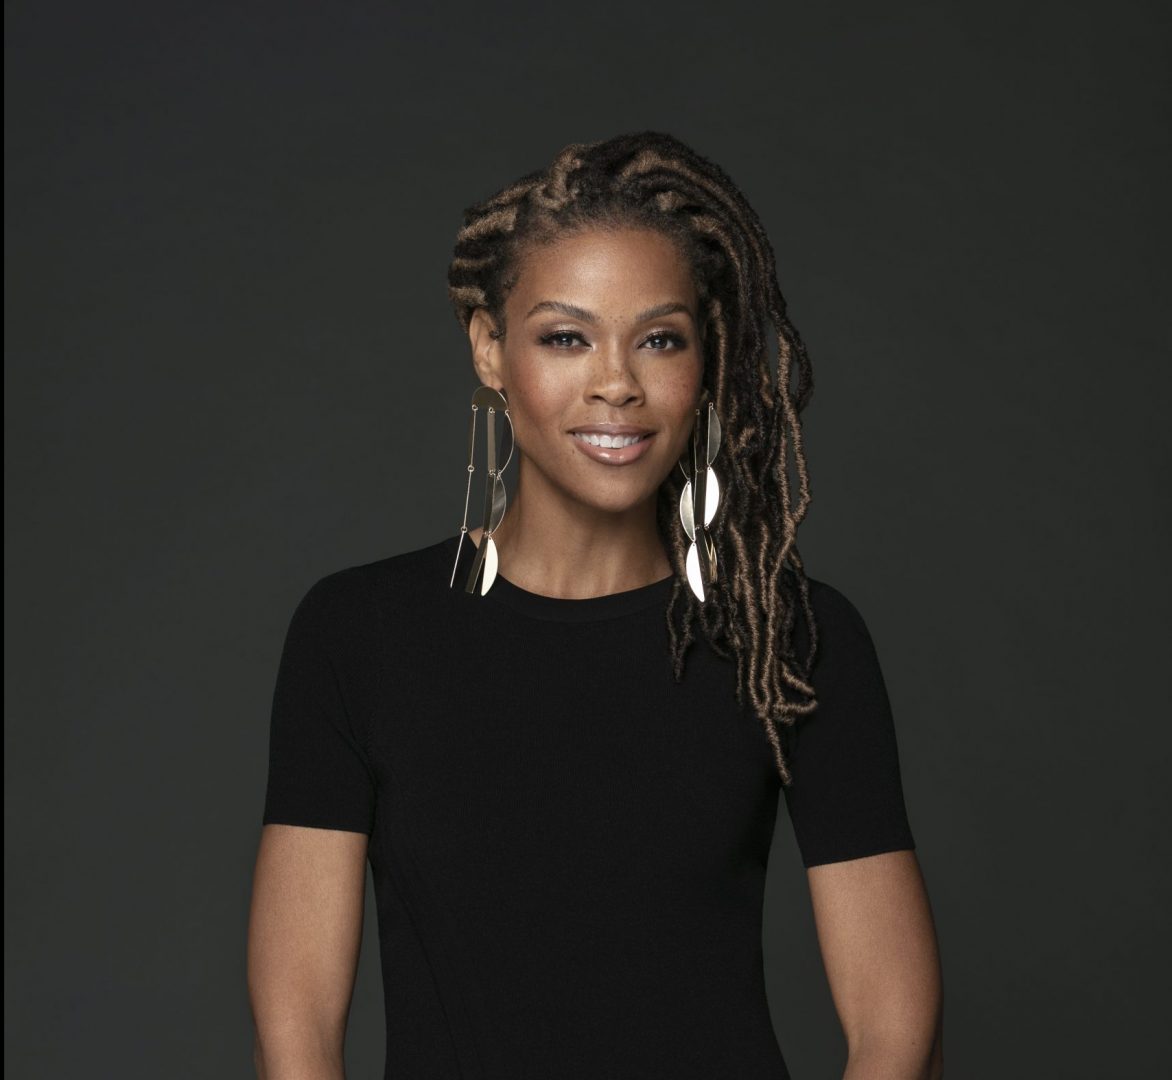 Melissa Ingram, SVP, multicultural networks and strategy at UP Entertainment, is the Black media executive driving growth at AspireTV